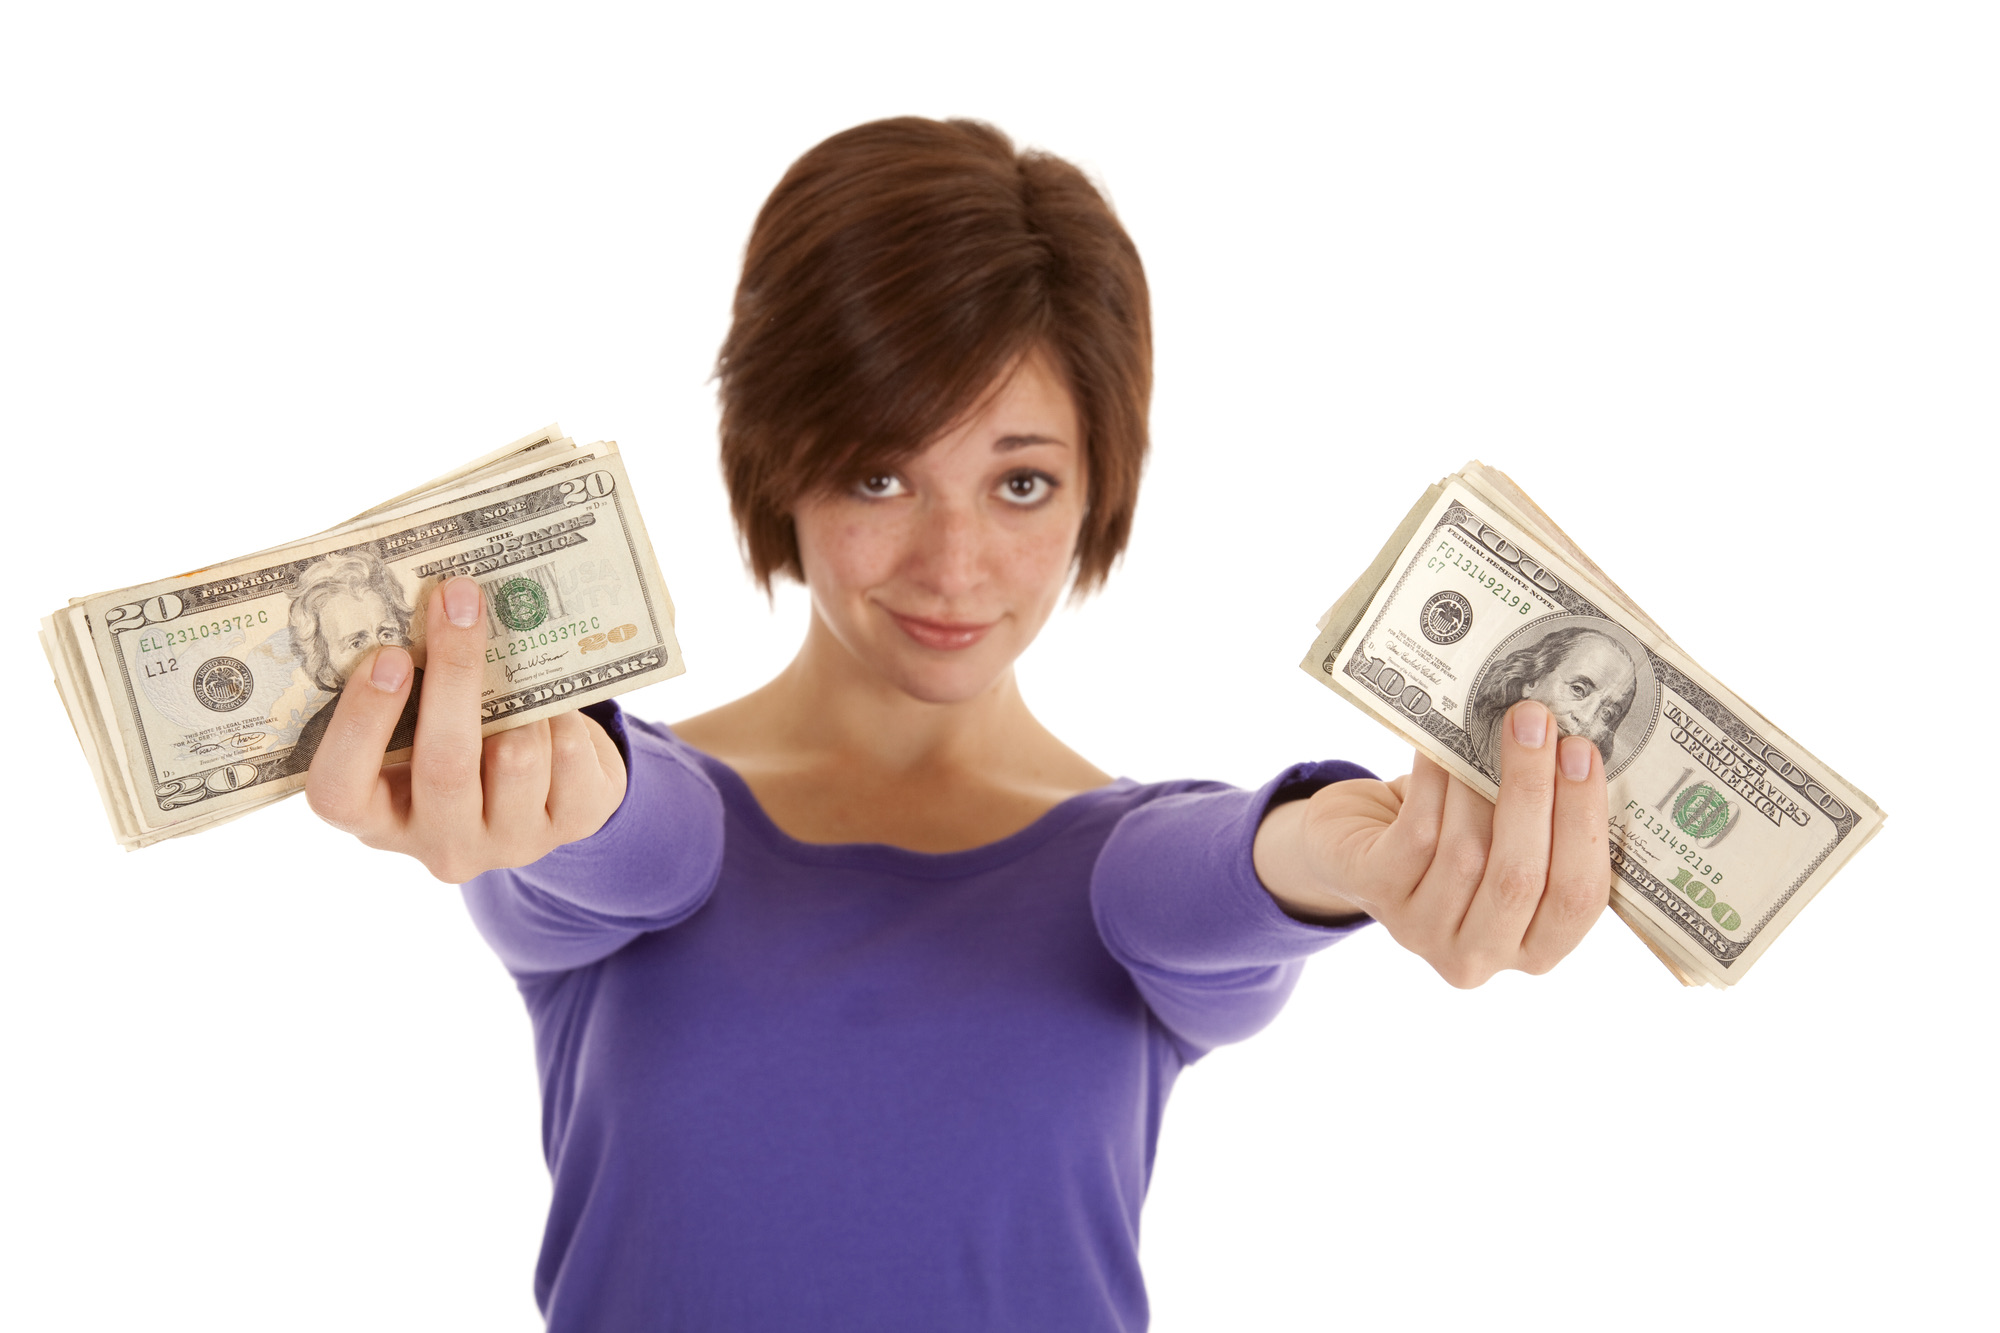 A woman with a serious expression on her face holding out her money in her hands.